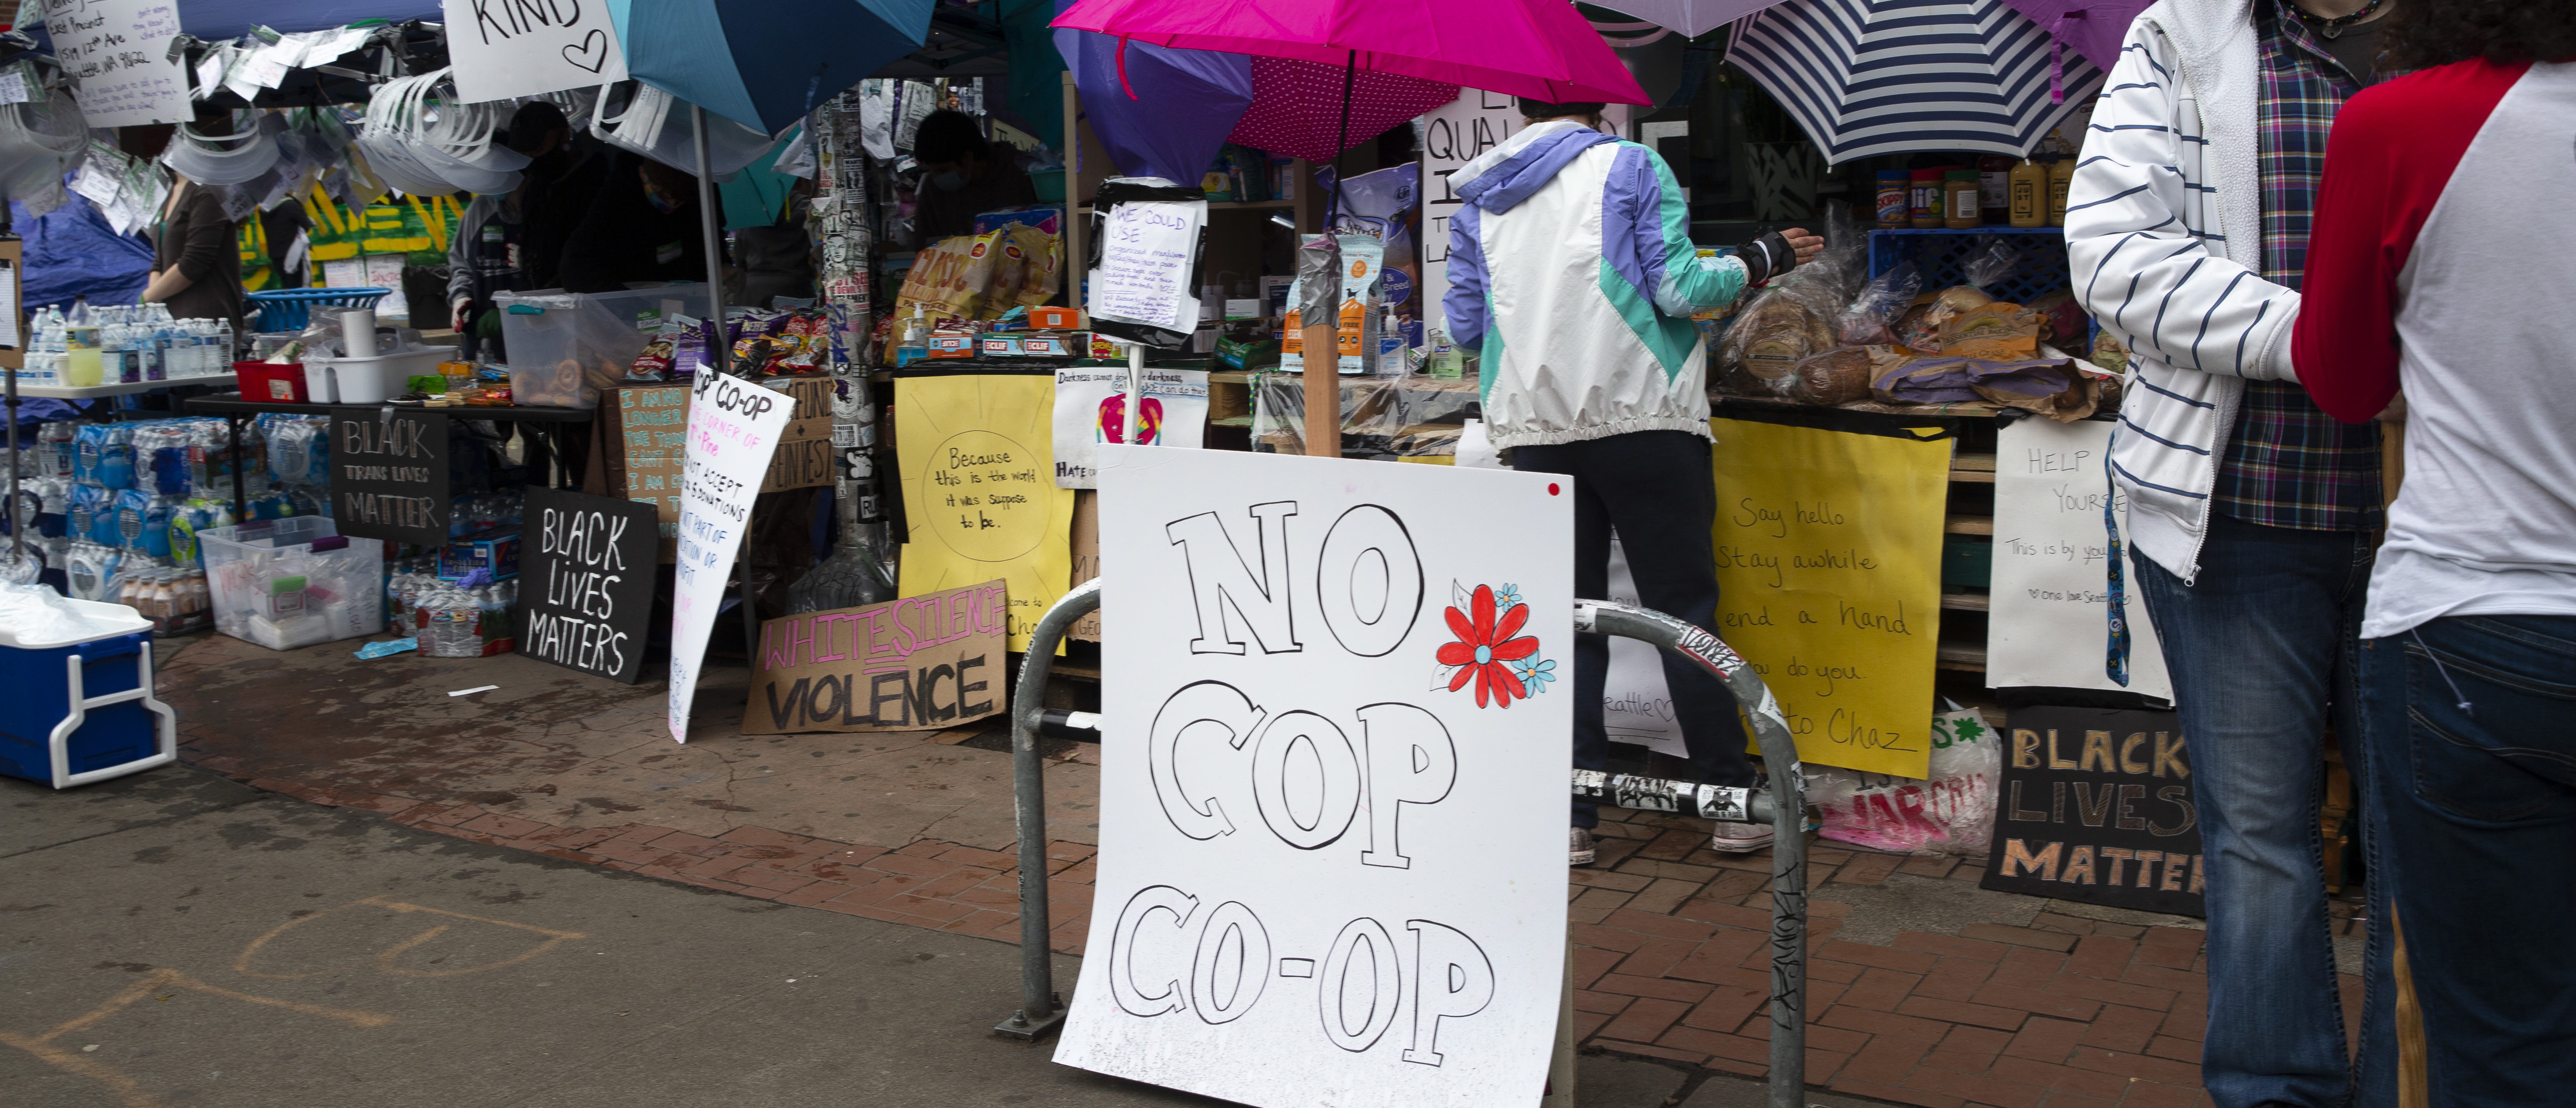 Many stands offering free items have been set up including the No Cop Co-op in an area dubbed the Capitol Hill Autonomous Zone (CHAZ) on June 12, 2020 in Seattle, Washington. (Karen Ducey/Getty Images)